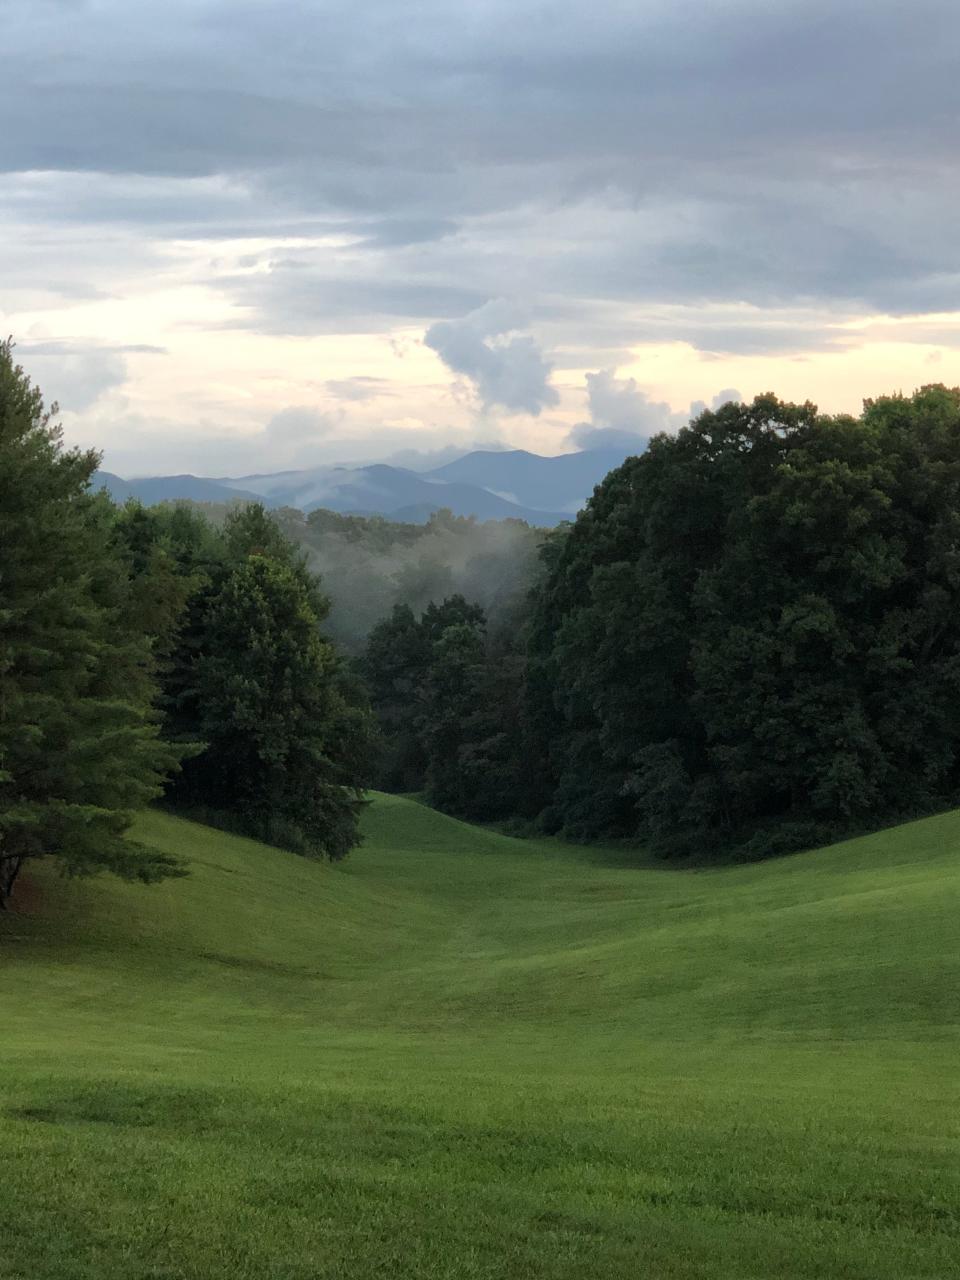 A view of the Blue Ridge Mountains from the Asheville School campus.